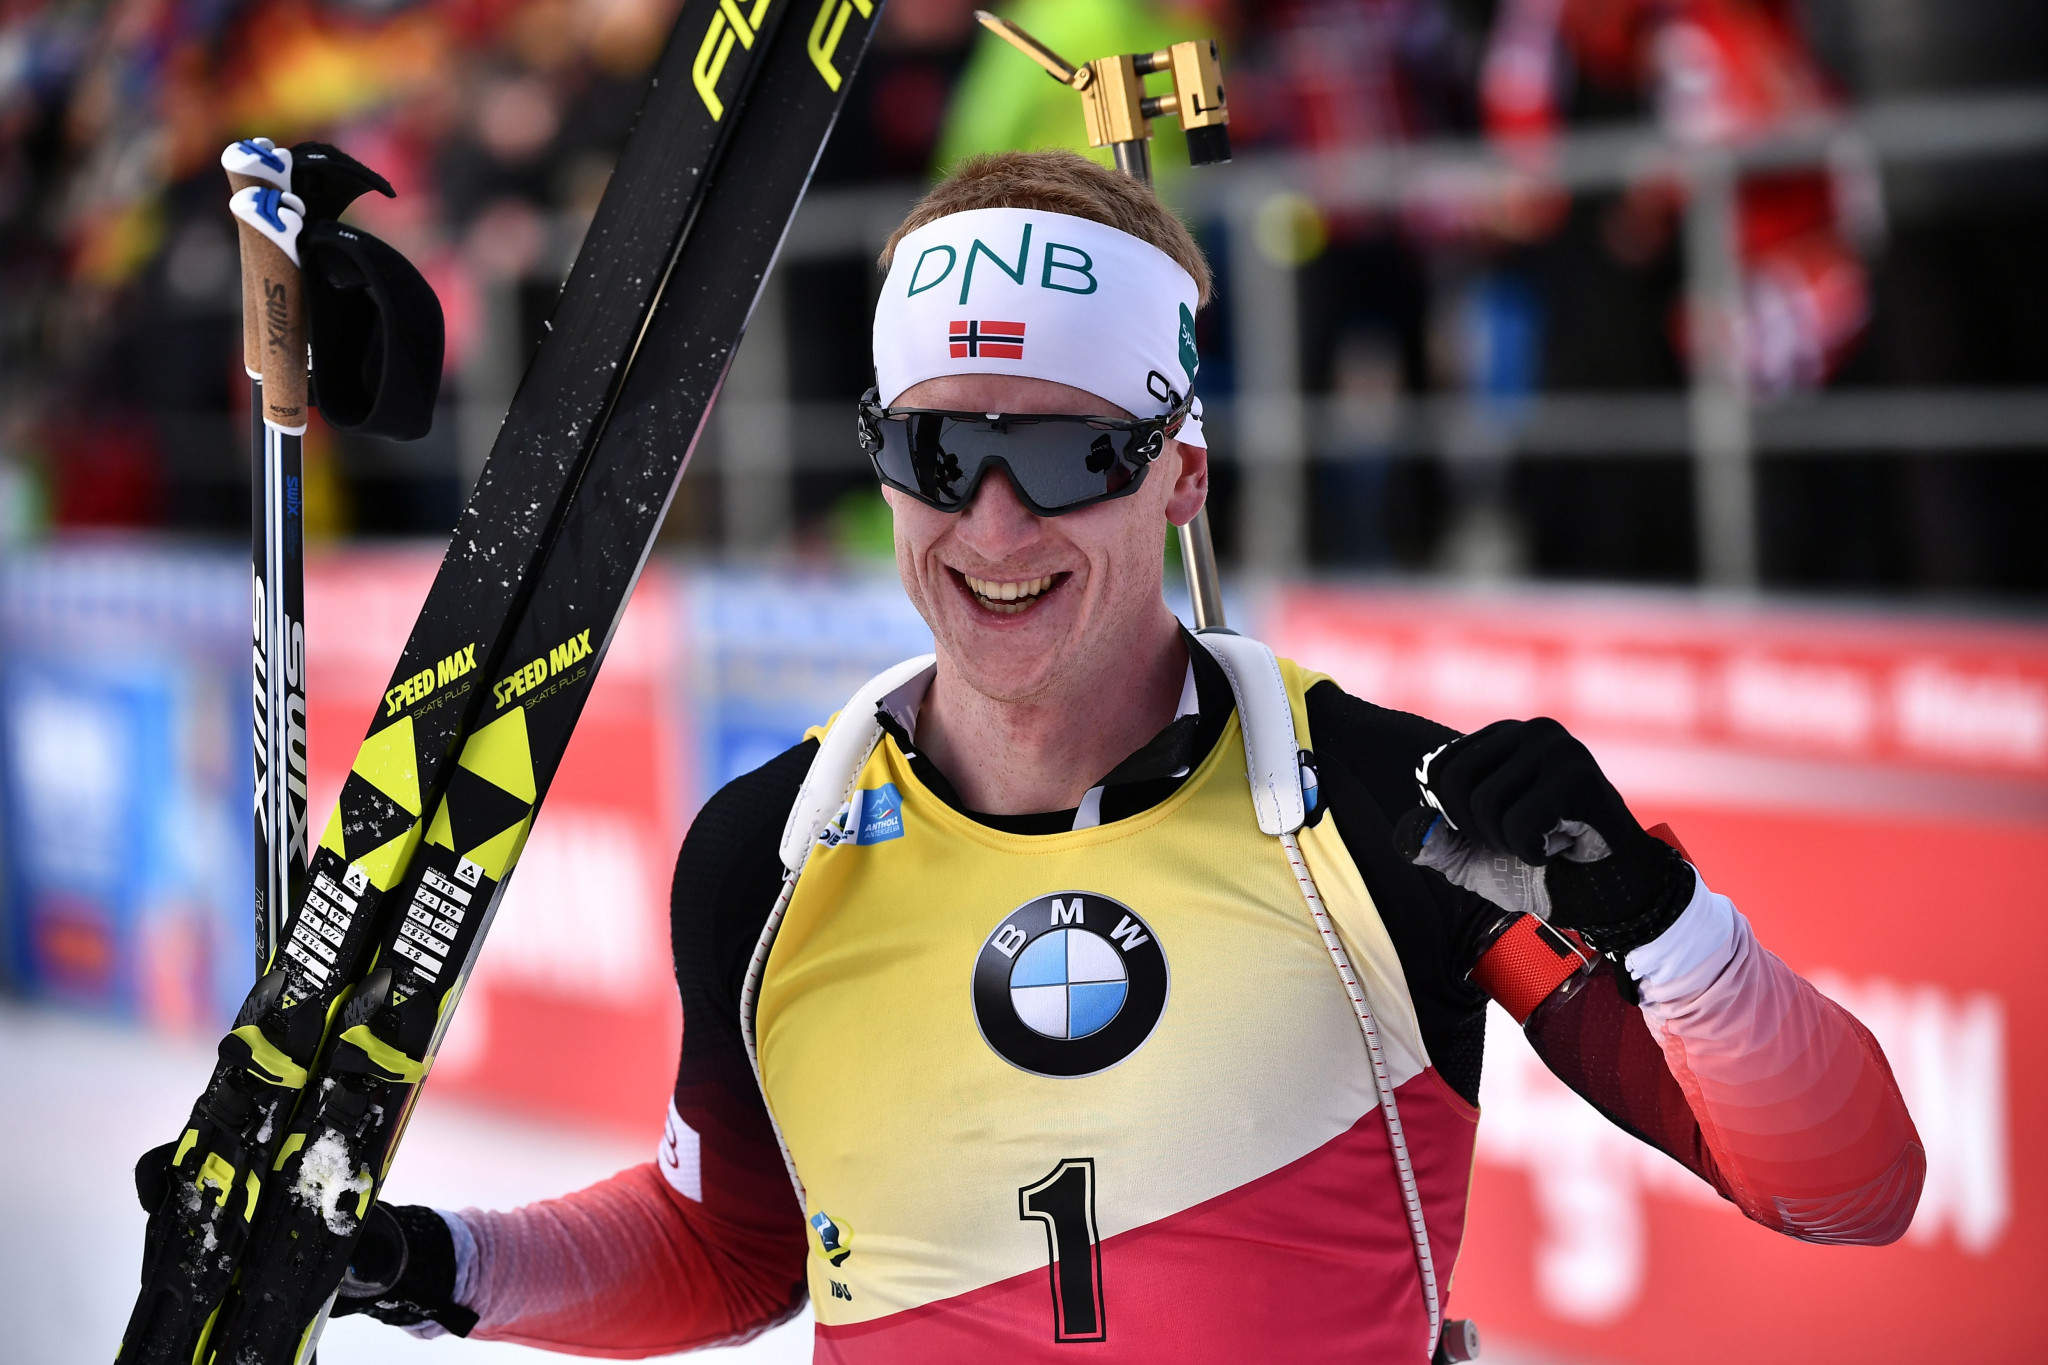 Norway's Johannes Thingnes Bø has claimed his 11th win of the World Cup season with pursuit victory in Antholz ©Getty Images